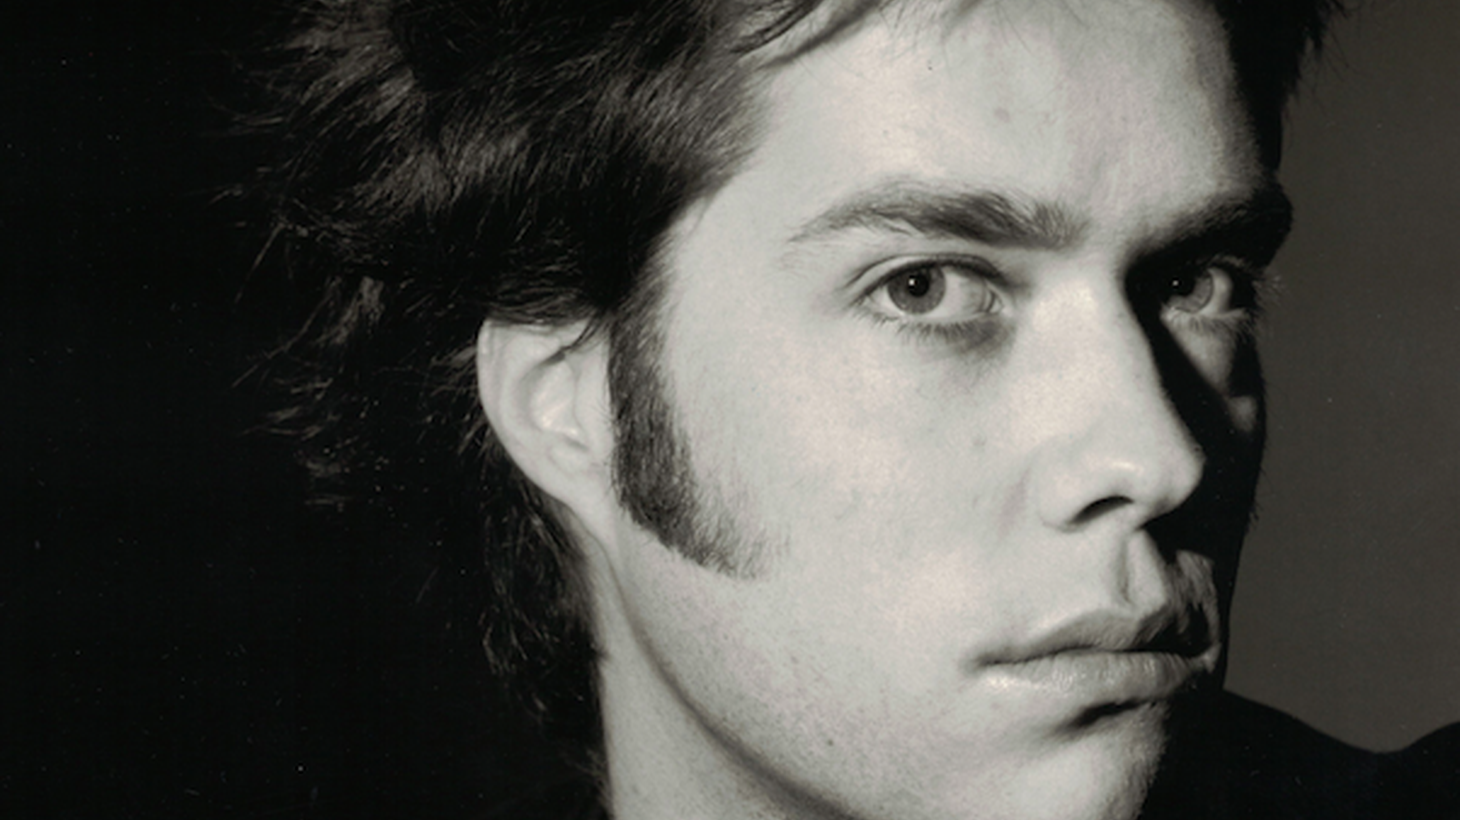 Rufus Wainwright is one of the great male vocalists, composers, and songwriters of his generation.